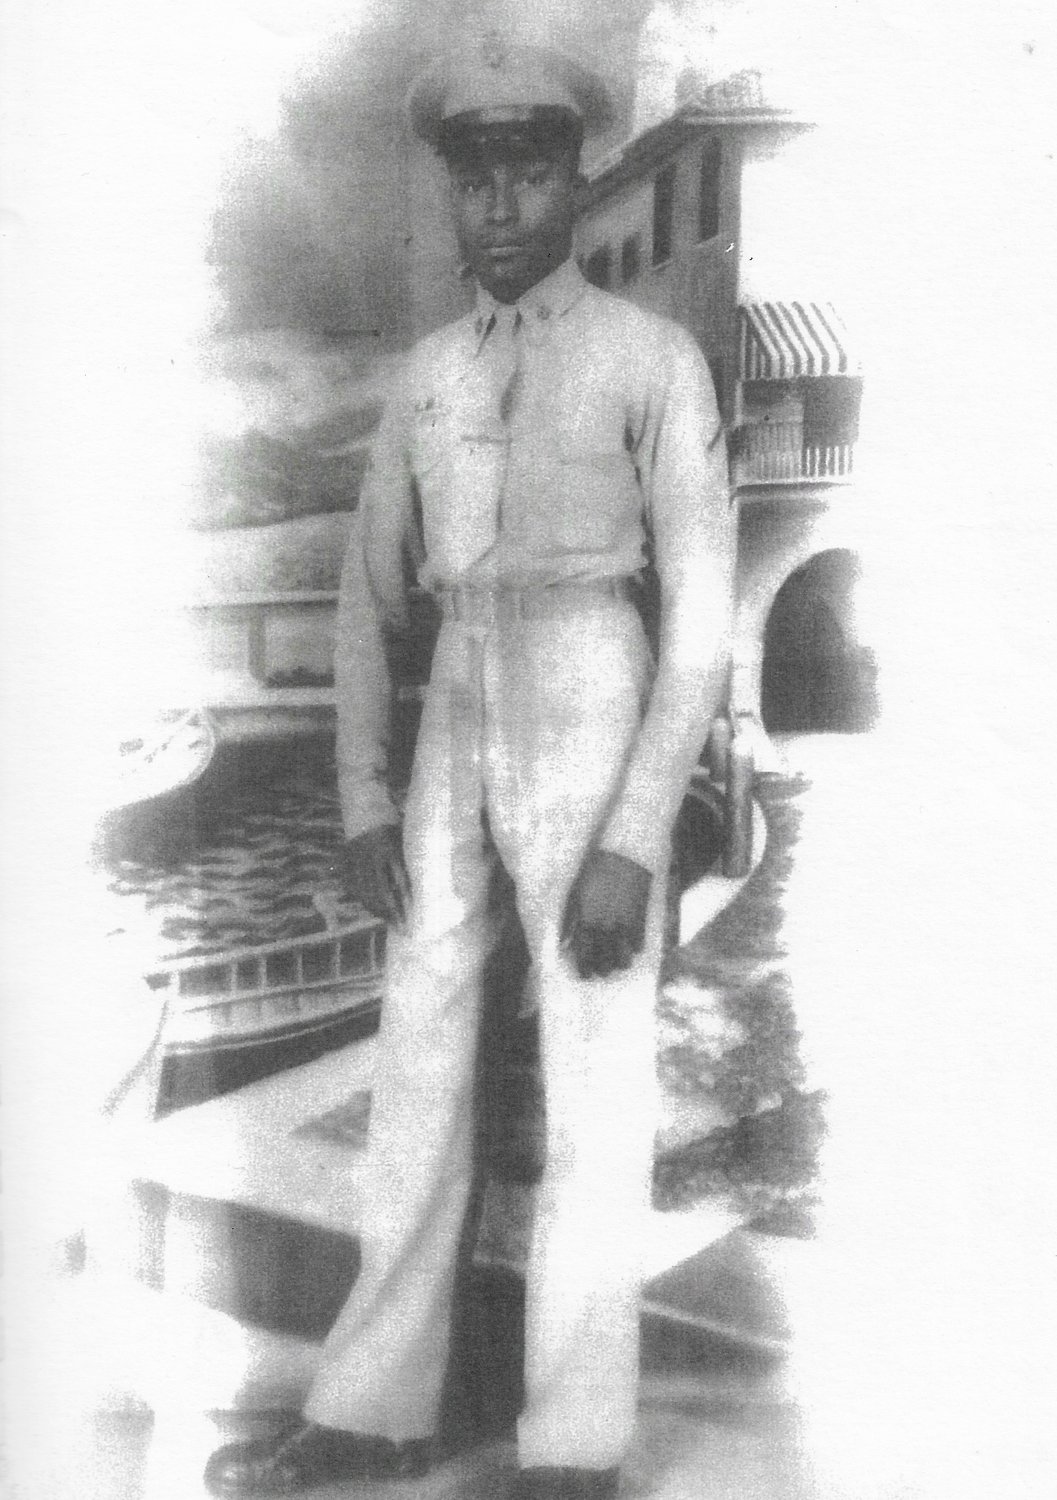 1953 photo of Isaiah Moultrie’s father, Rev. Isaiah Moultrie, in his soldier’s uniform